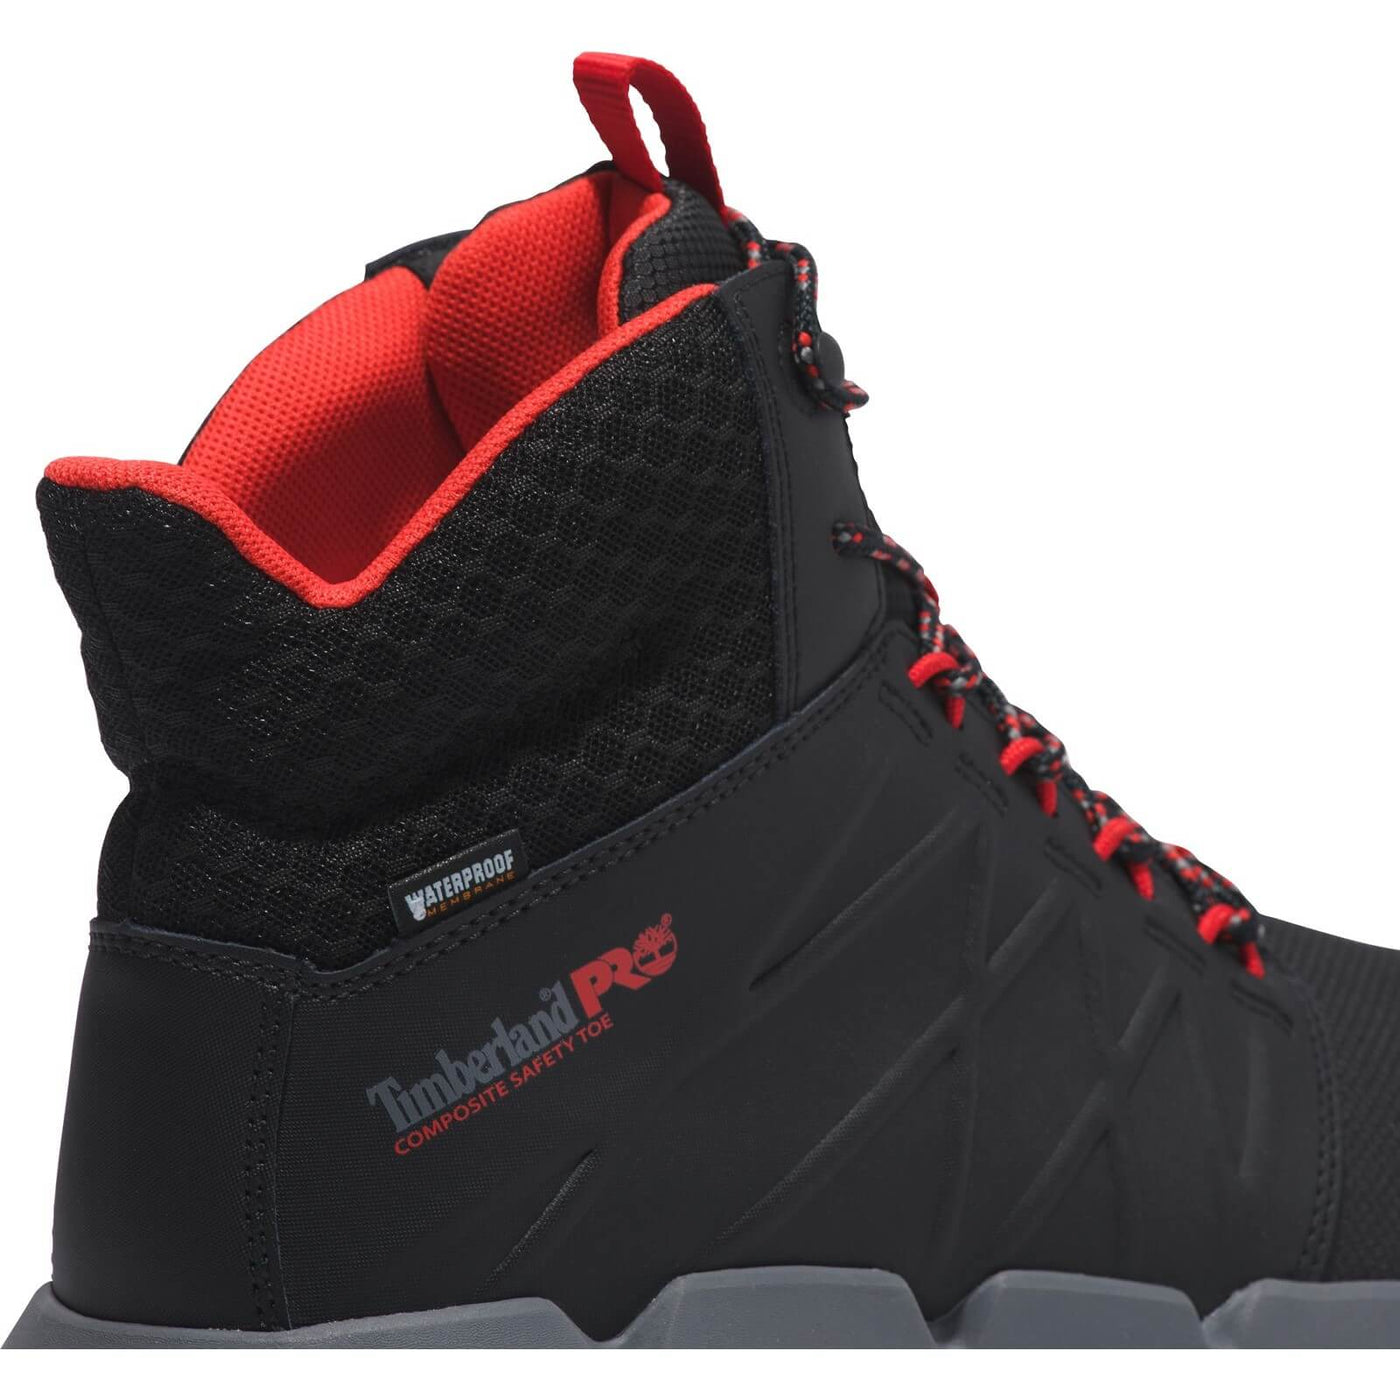 Timberland Pro Morphix 6 Inch Waterproof Composite S7L Hiker Safety Boots Black/Red 8#colour_black-red